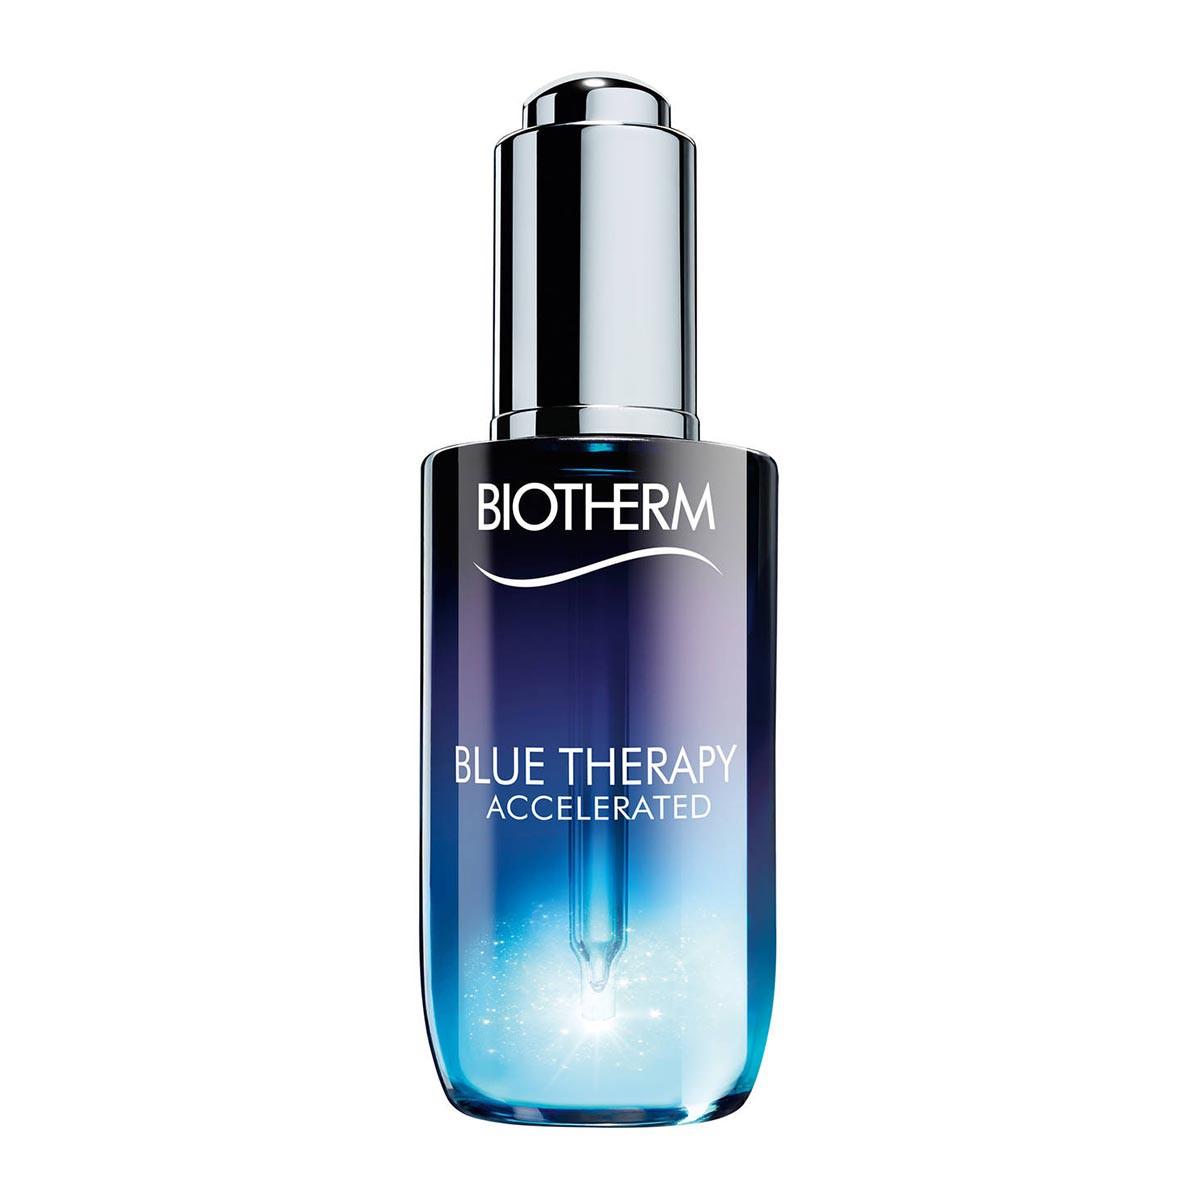 biotherm-kaikki-ihotyypit-blue-therapy-accelerated-50ml